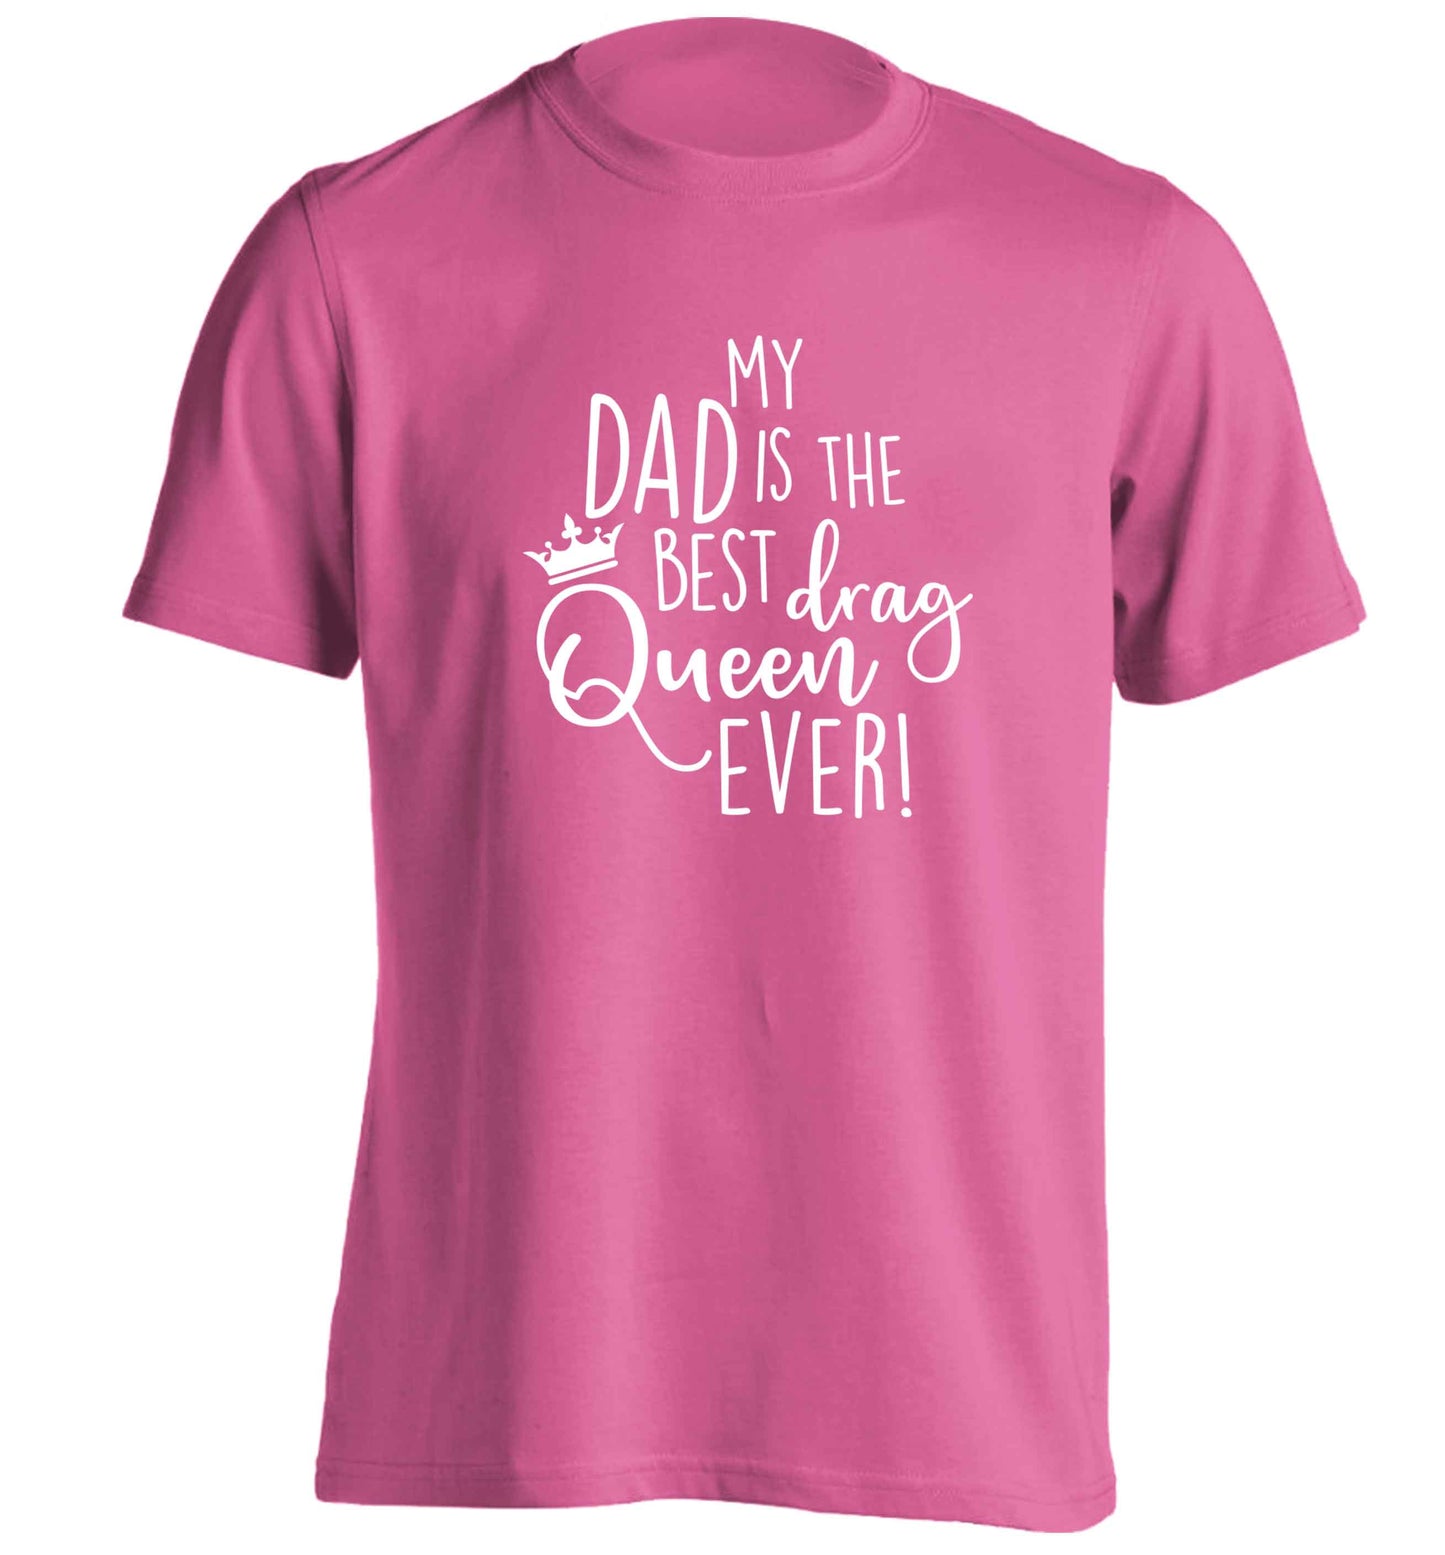 My dad is the best drag Queen ever adults unisex pink Tshirt 2XL